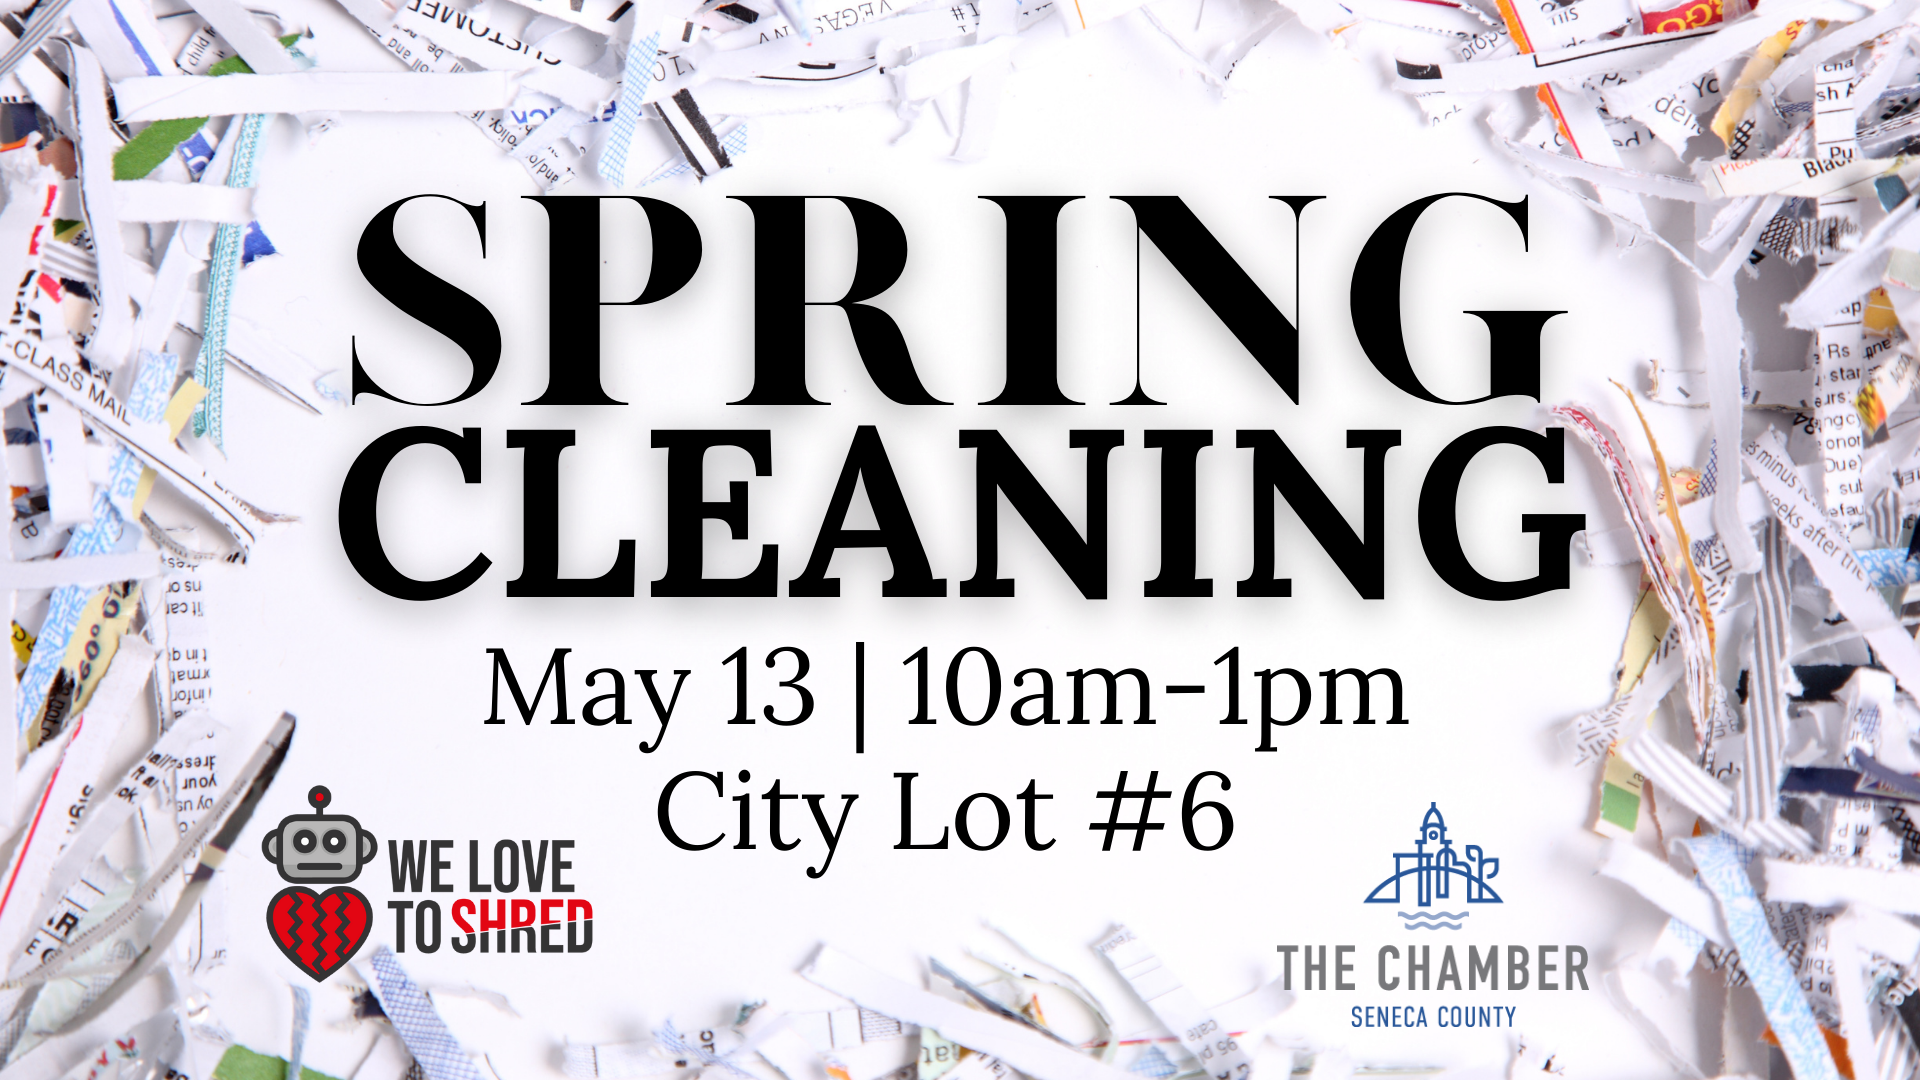 Chamber Announces Spring Cleaning Document Shredding Event